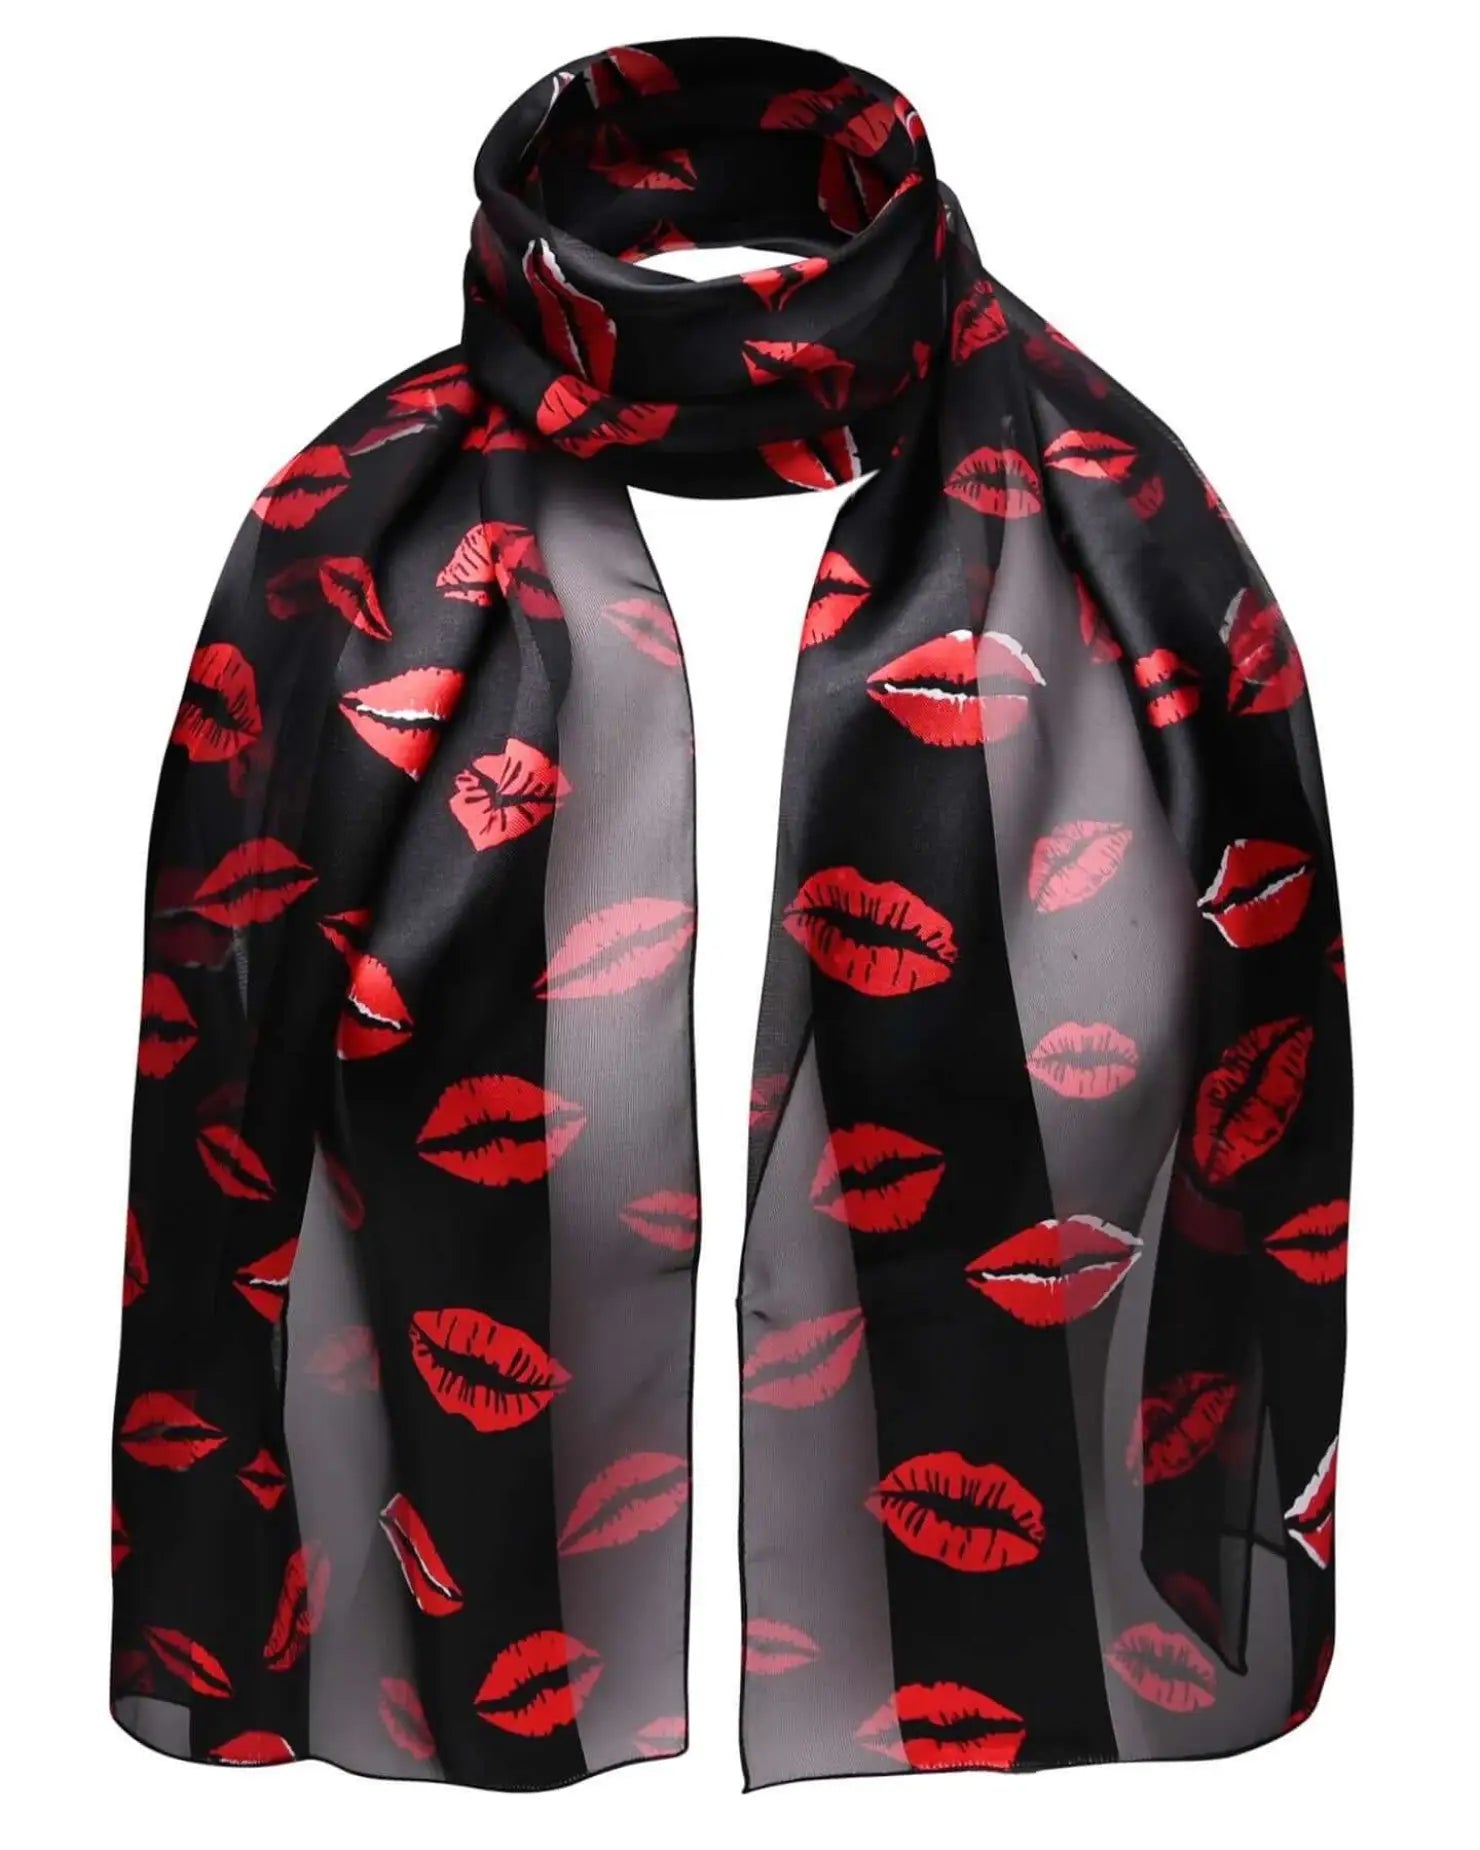 Black satin lightweight scarf with red kiss mark design